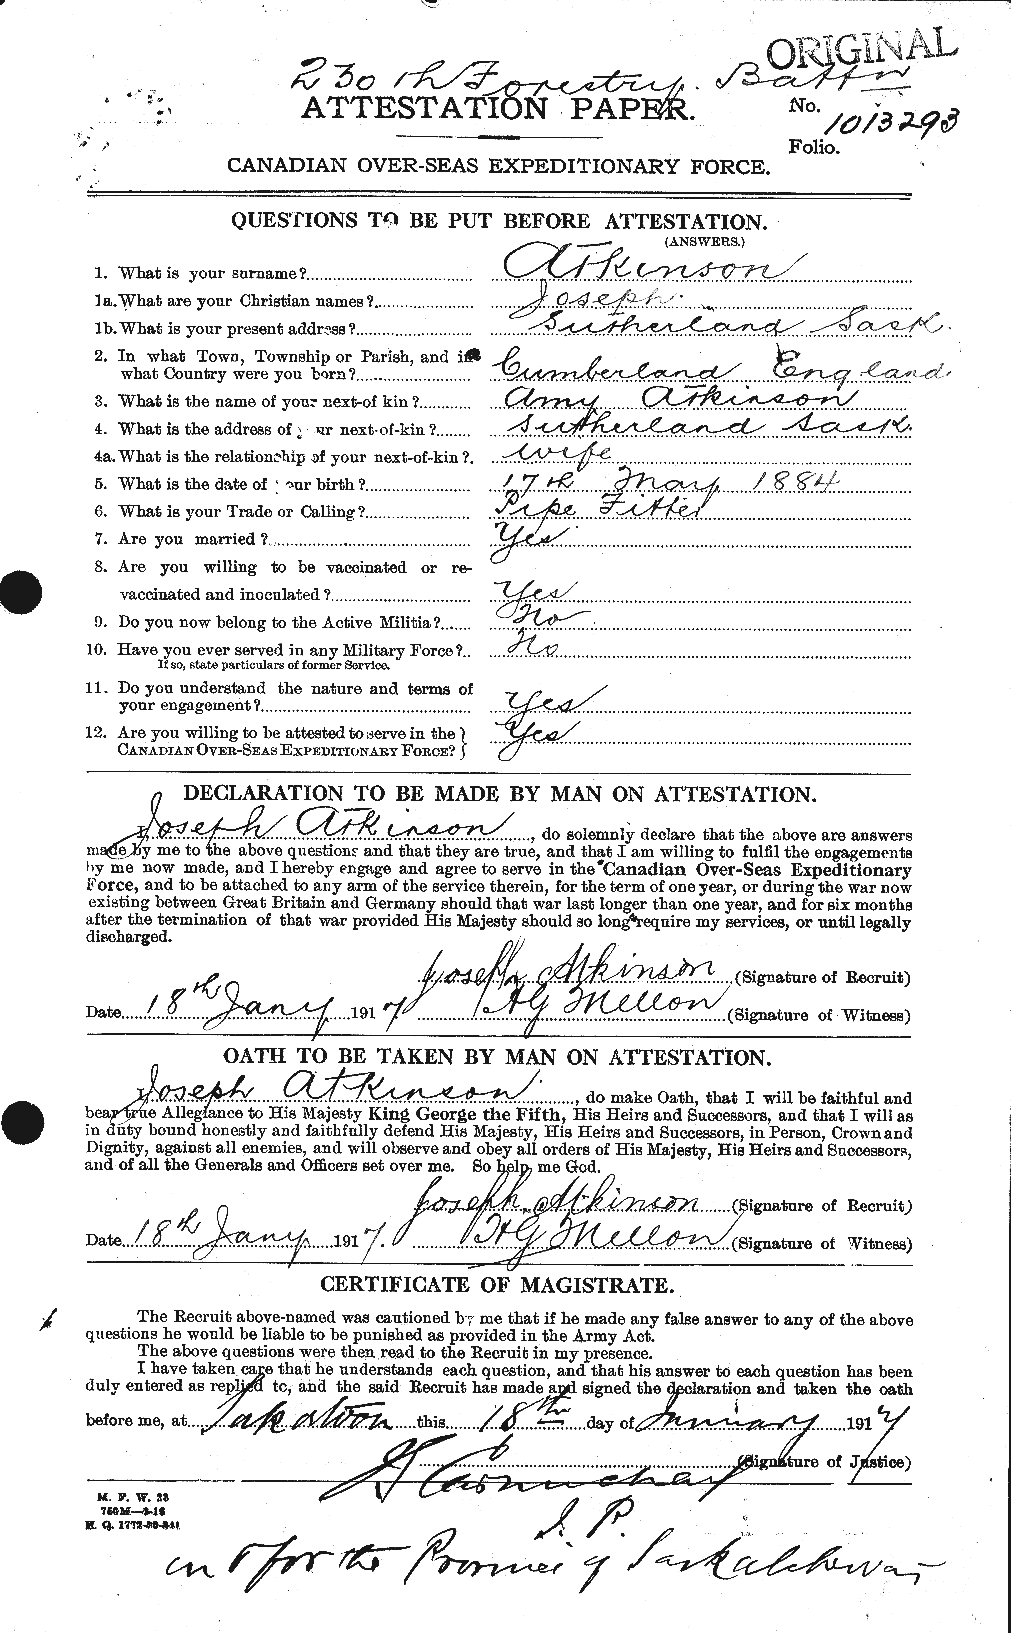 Personnel Records of the First World War - CEF 217290a